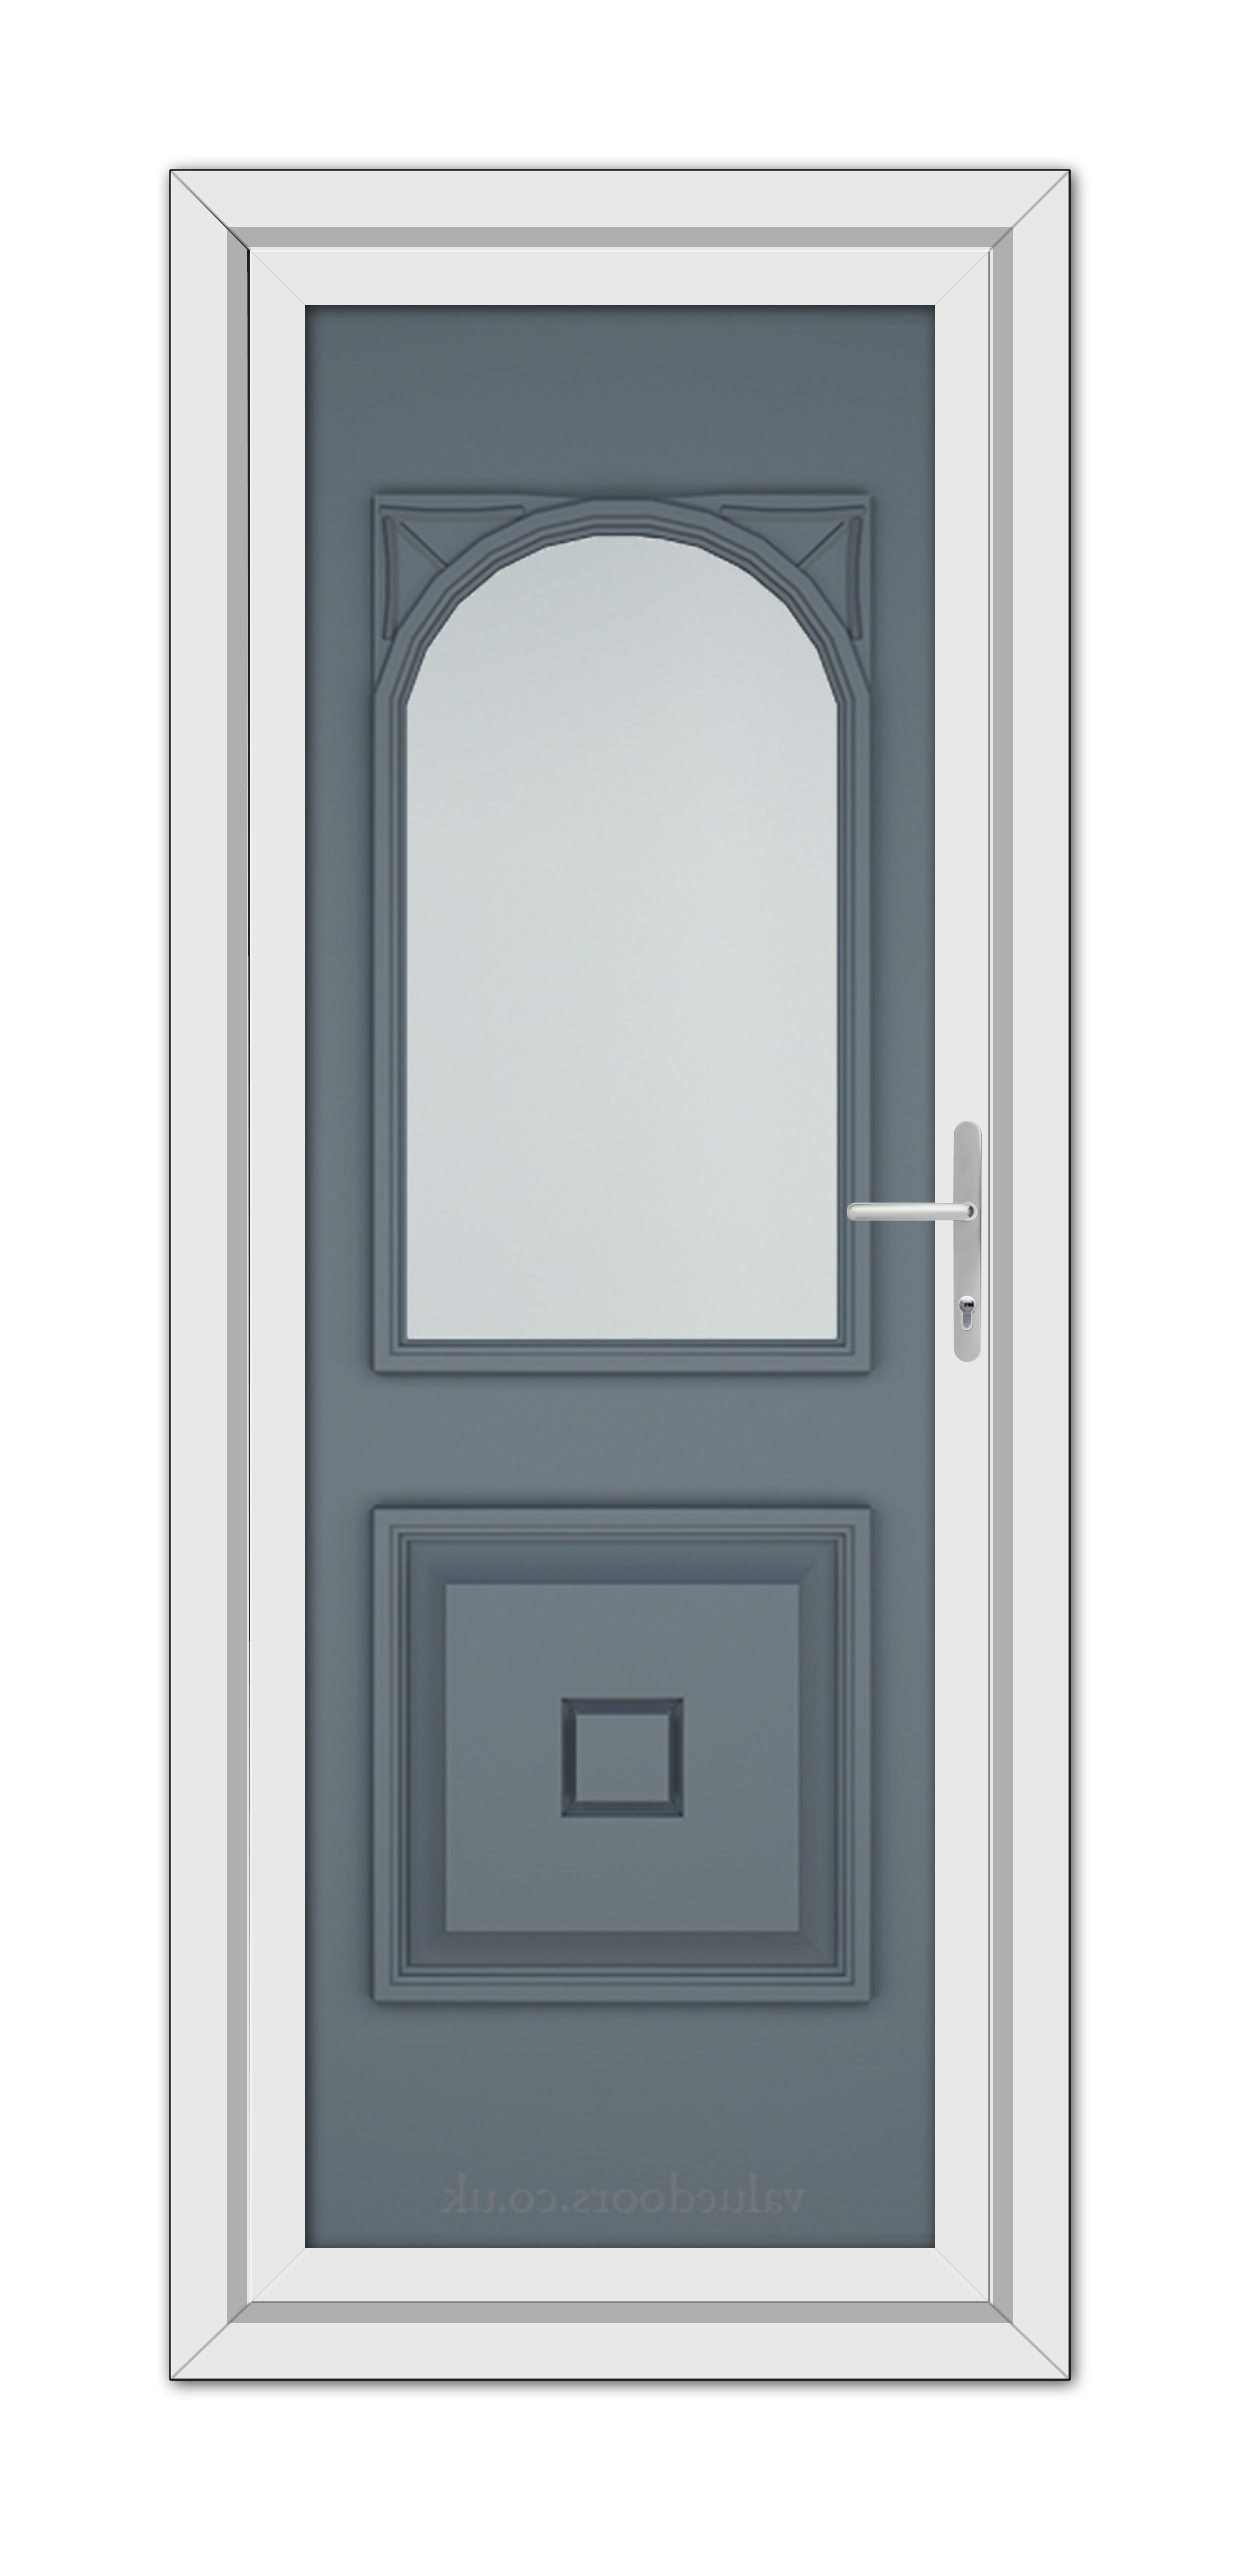 A Slate Grey Reims uPVC door with a glass panel.